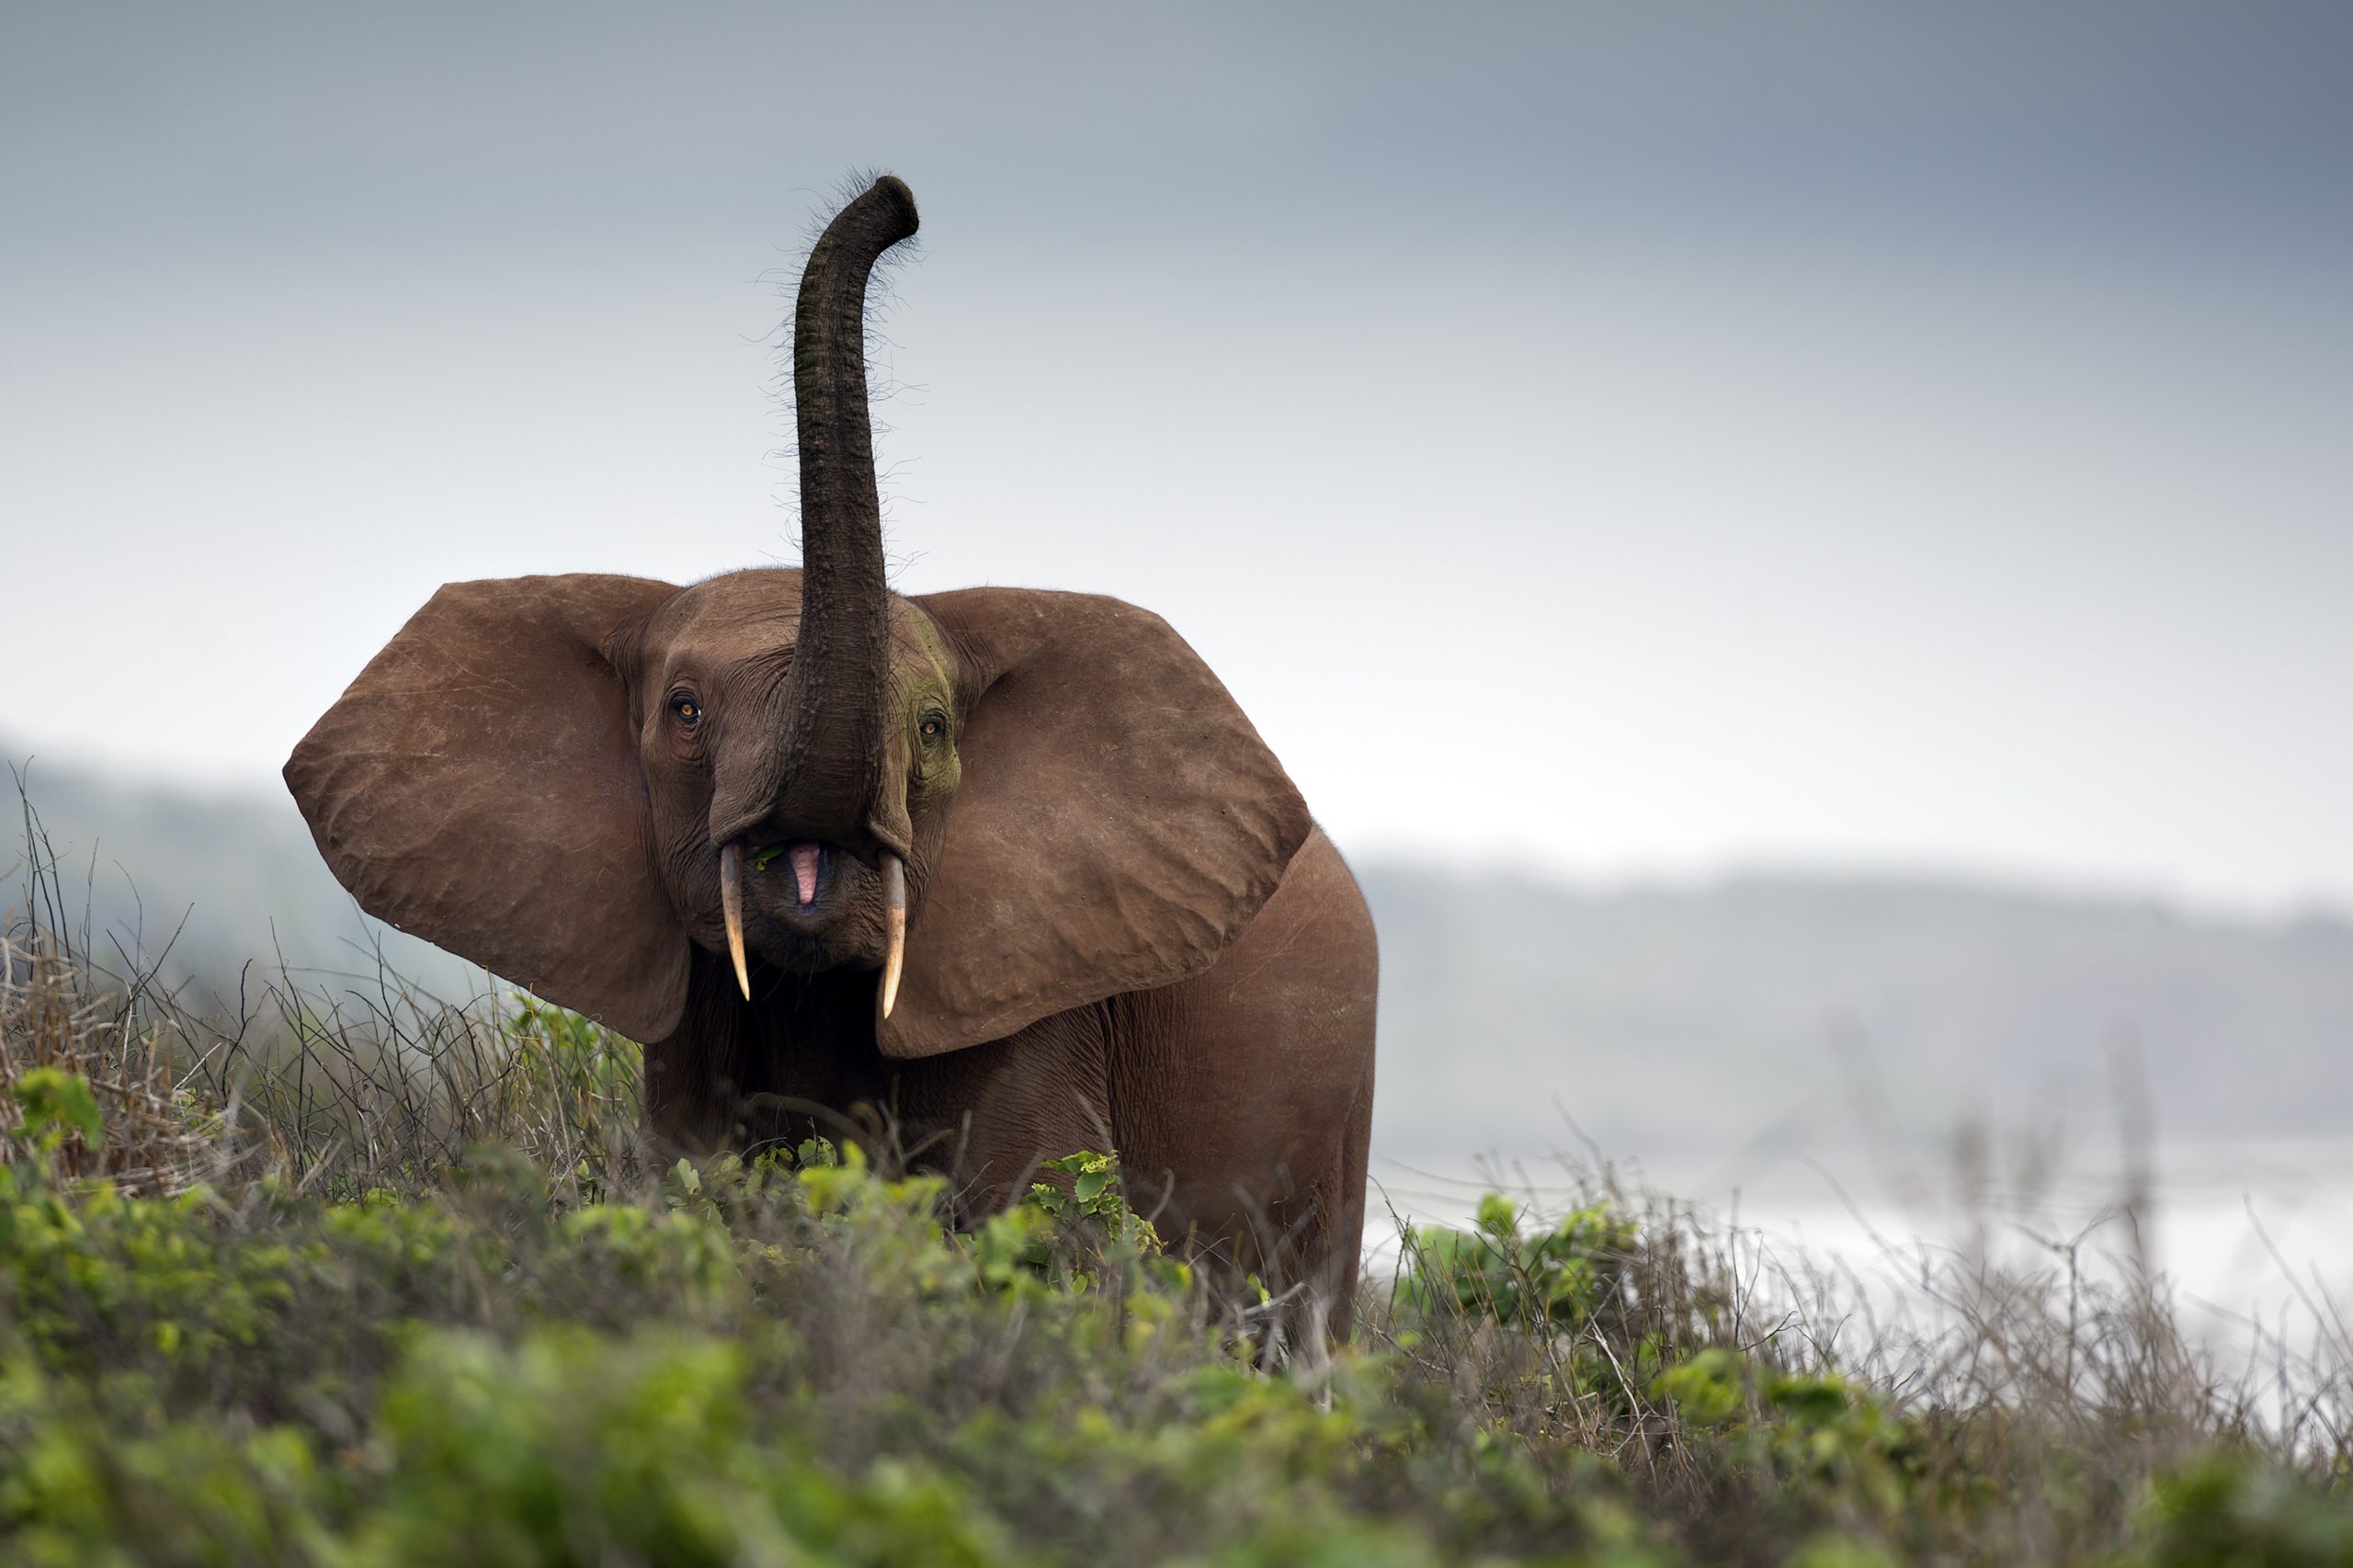 An elephant with its trunk raised in the air with grass in the foreground and misty background